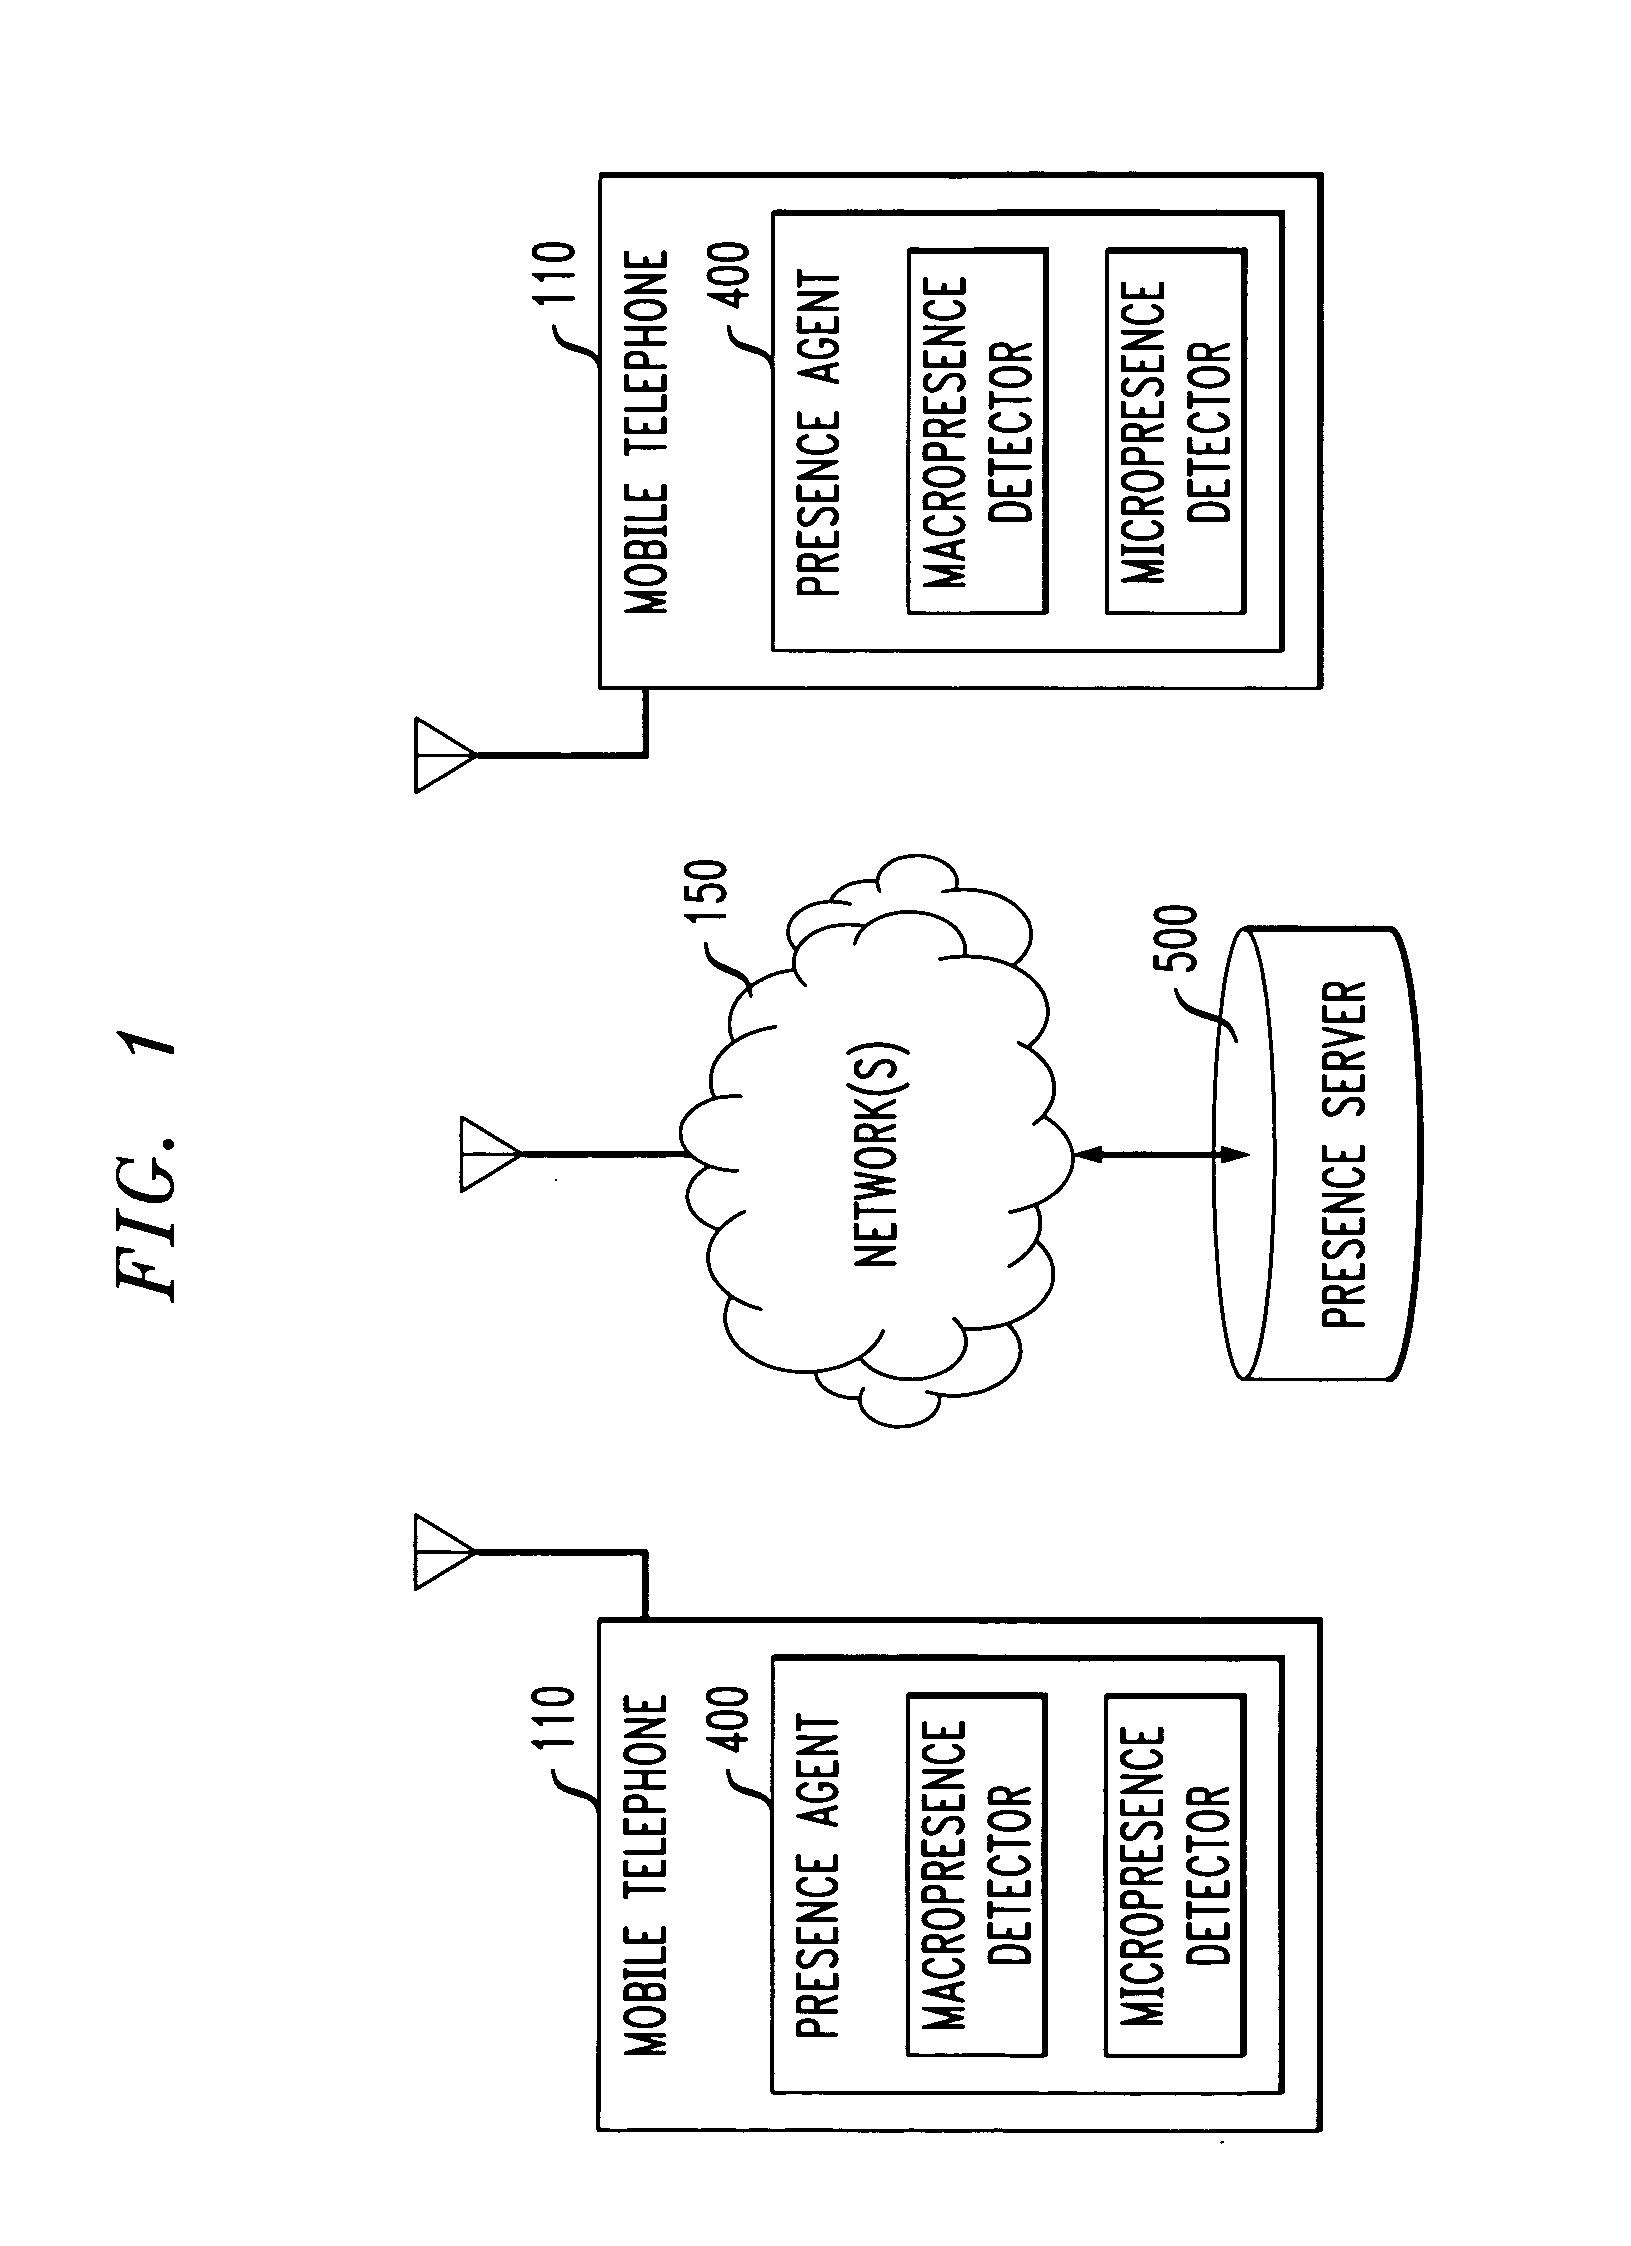 Methods and apparatus for determining a proxy presence of a user